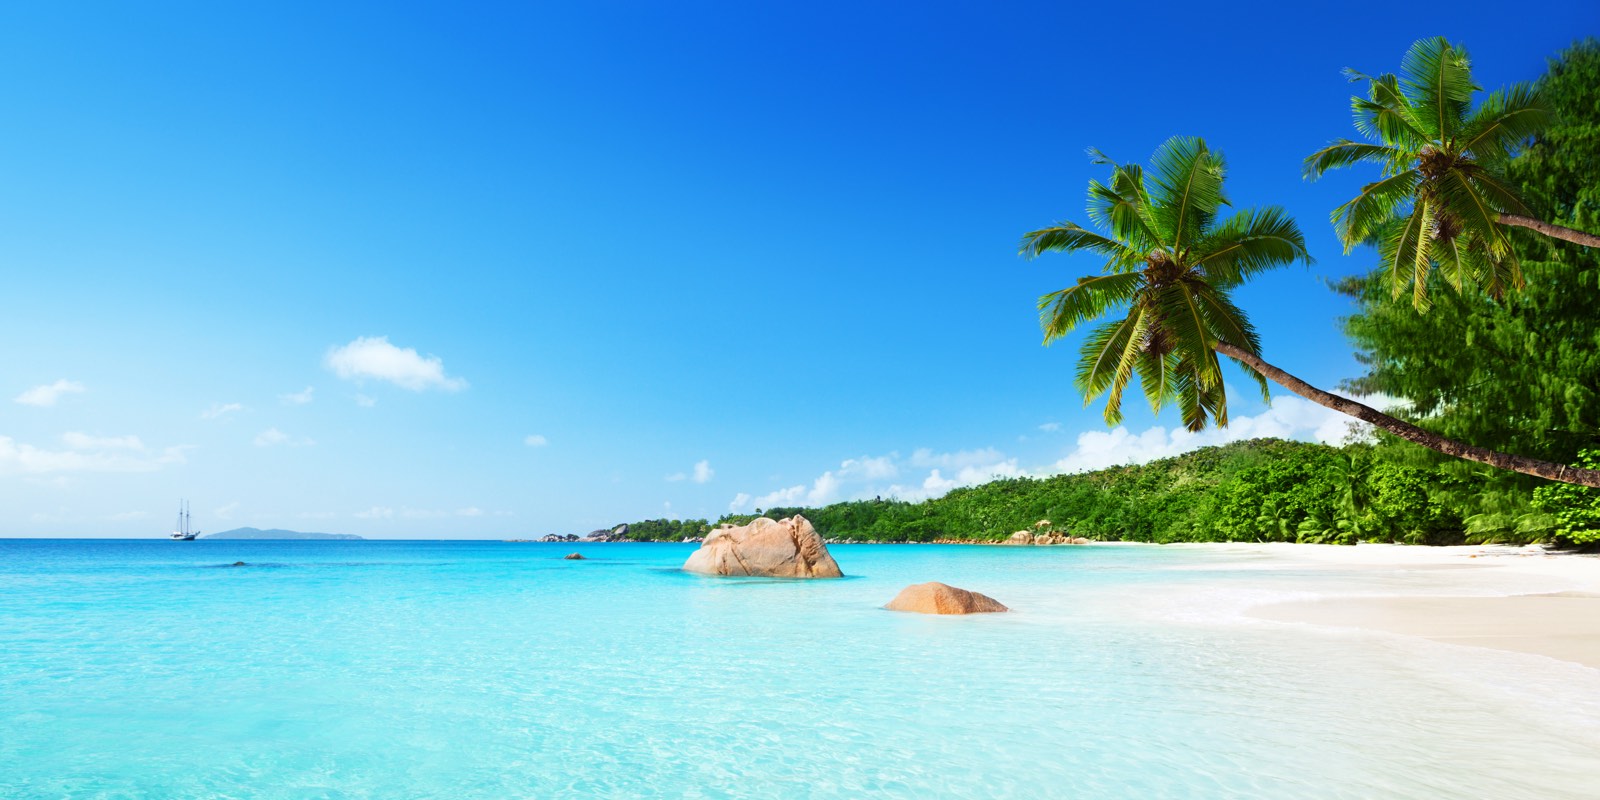 Travel blog: 12 Stunning Pictures Of The Seychelles We Can’t Stop Staring At